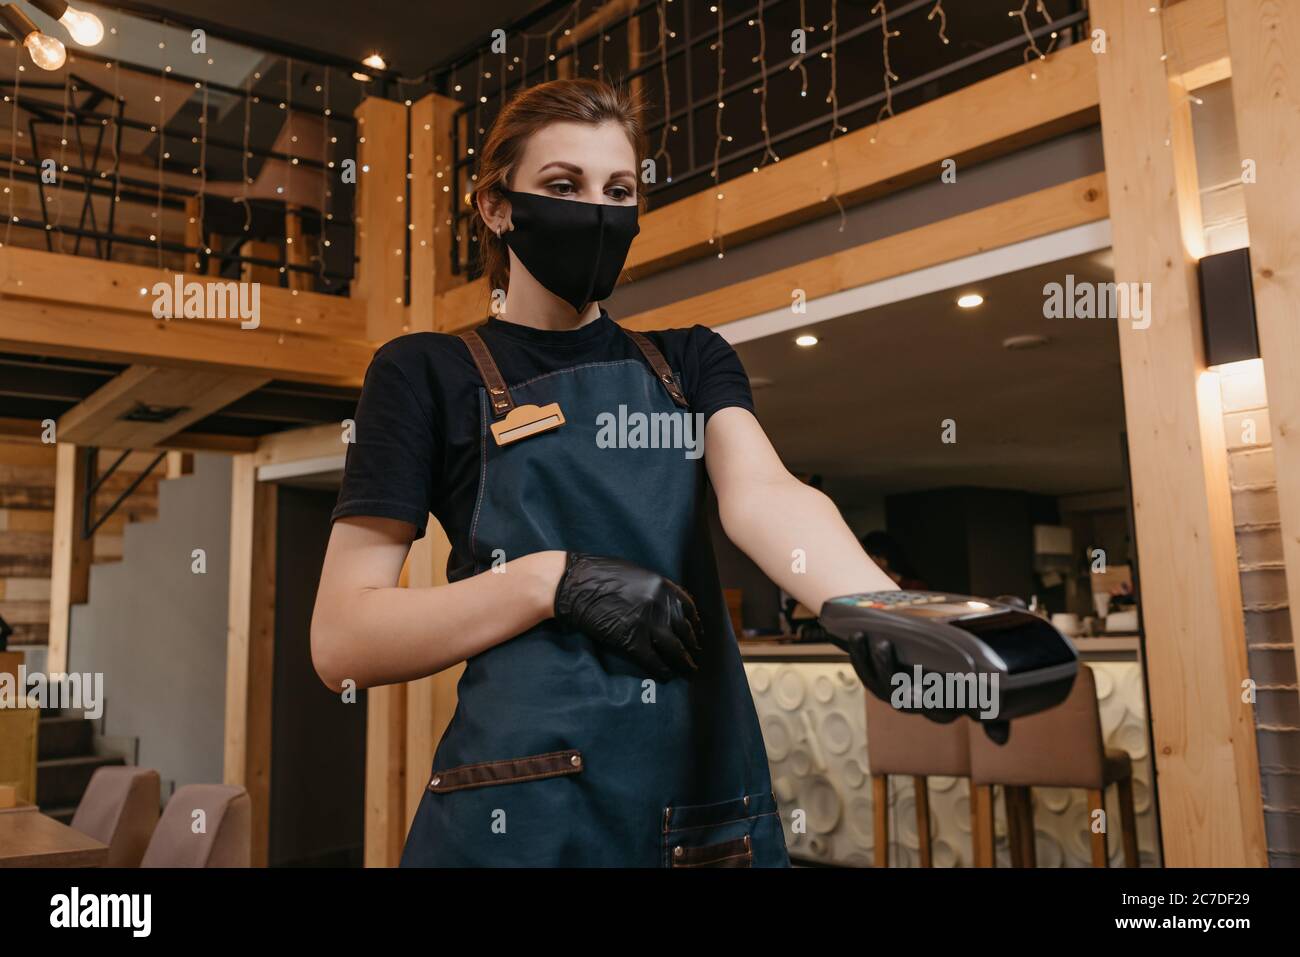 A waitress who wears an apron, a medical face mask, and disposable medical gloves is handing a wireless payment terminal to a client in a restaurant. Stock Photo